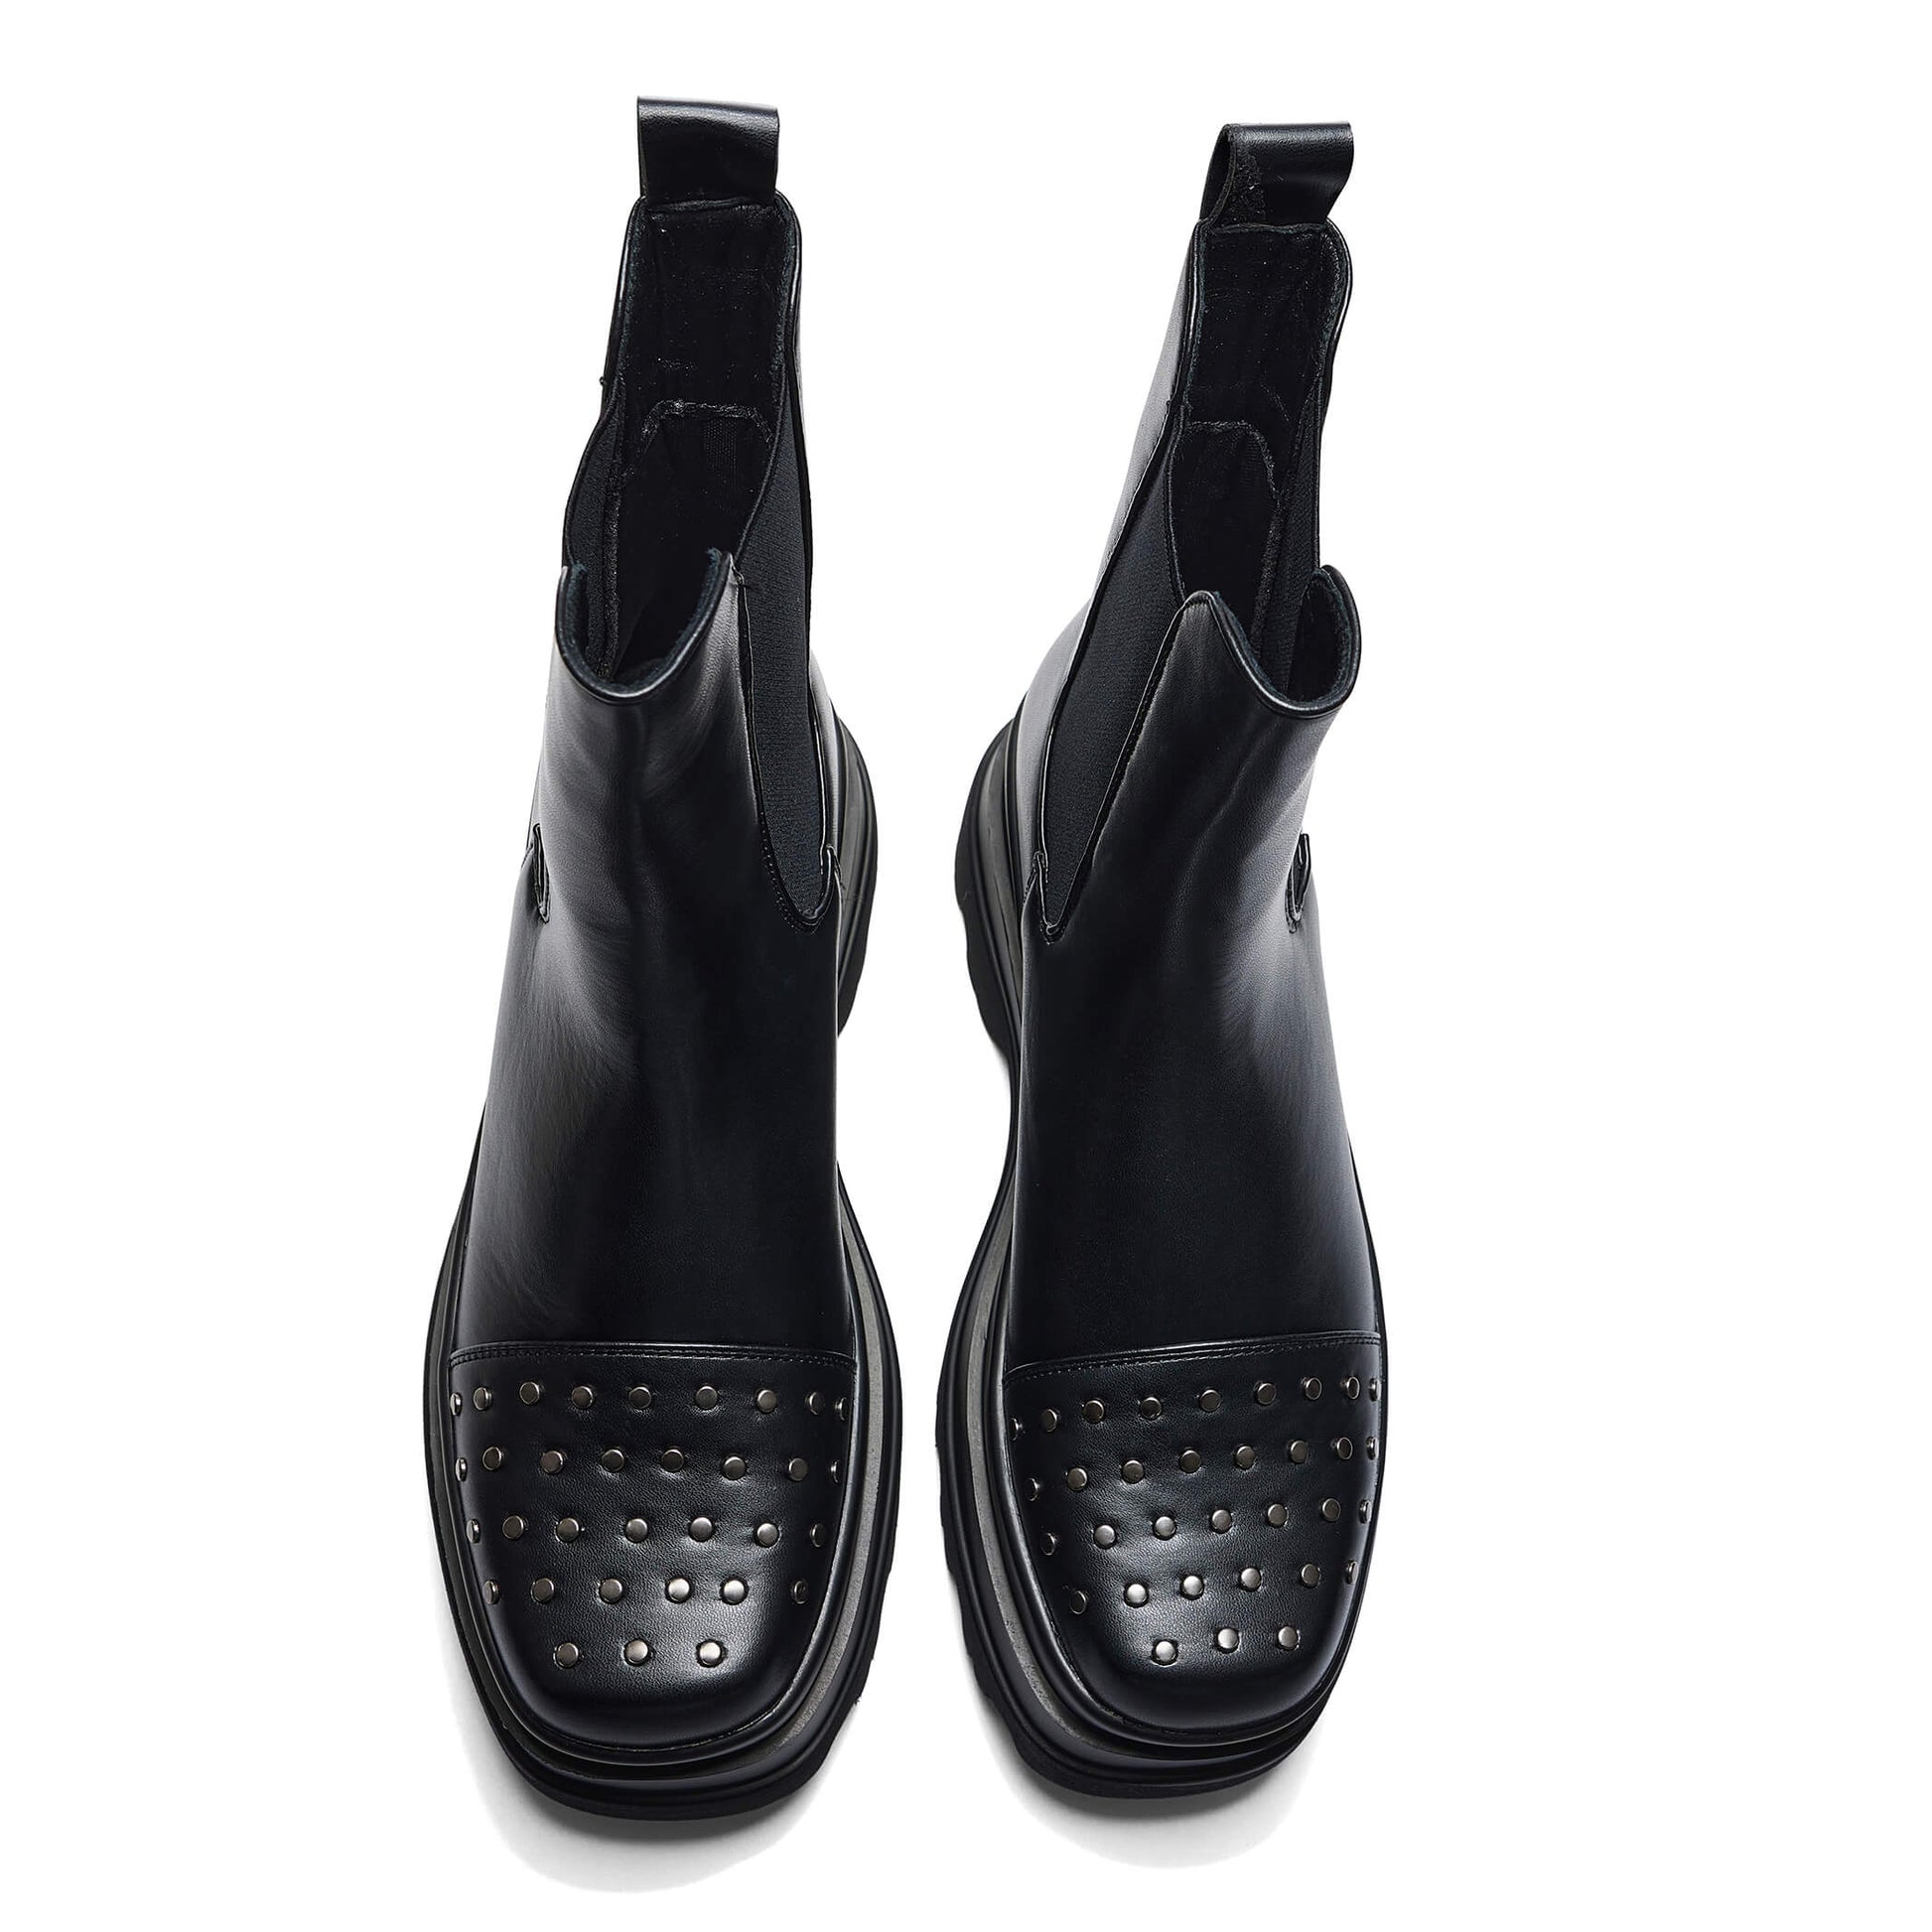 Silence Studded Trident Chelsea Boots - Black - Ankle Boots - KOI Footwear - Black - Top View